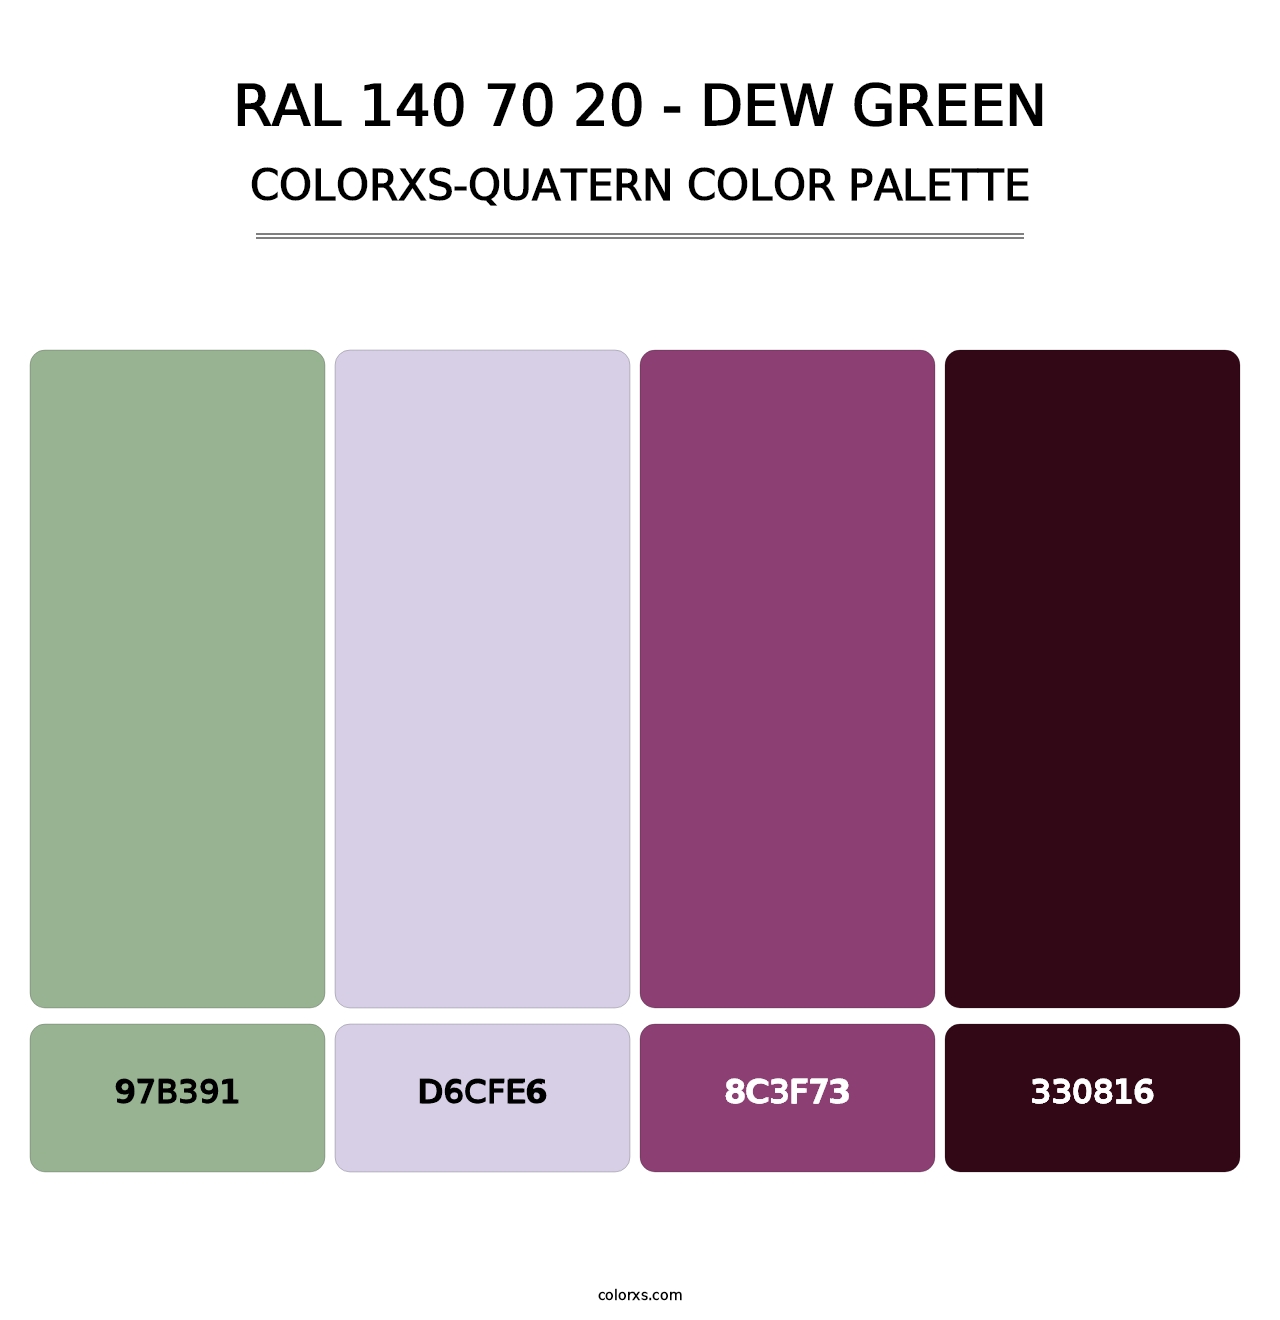 RAL 140 70 20 - Dew Green - Colorxs Quatern Palette